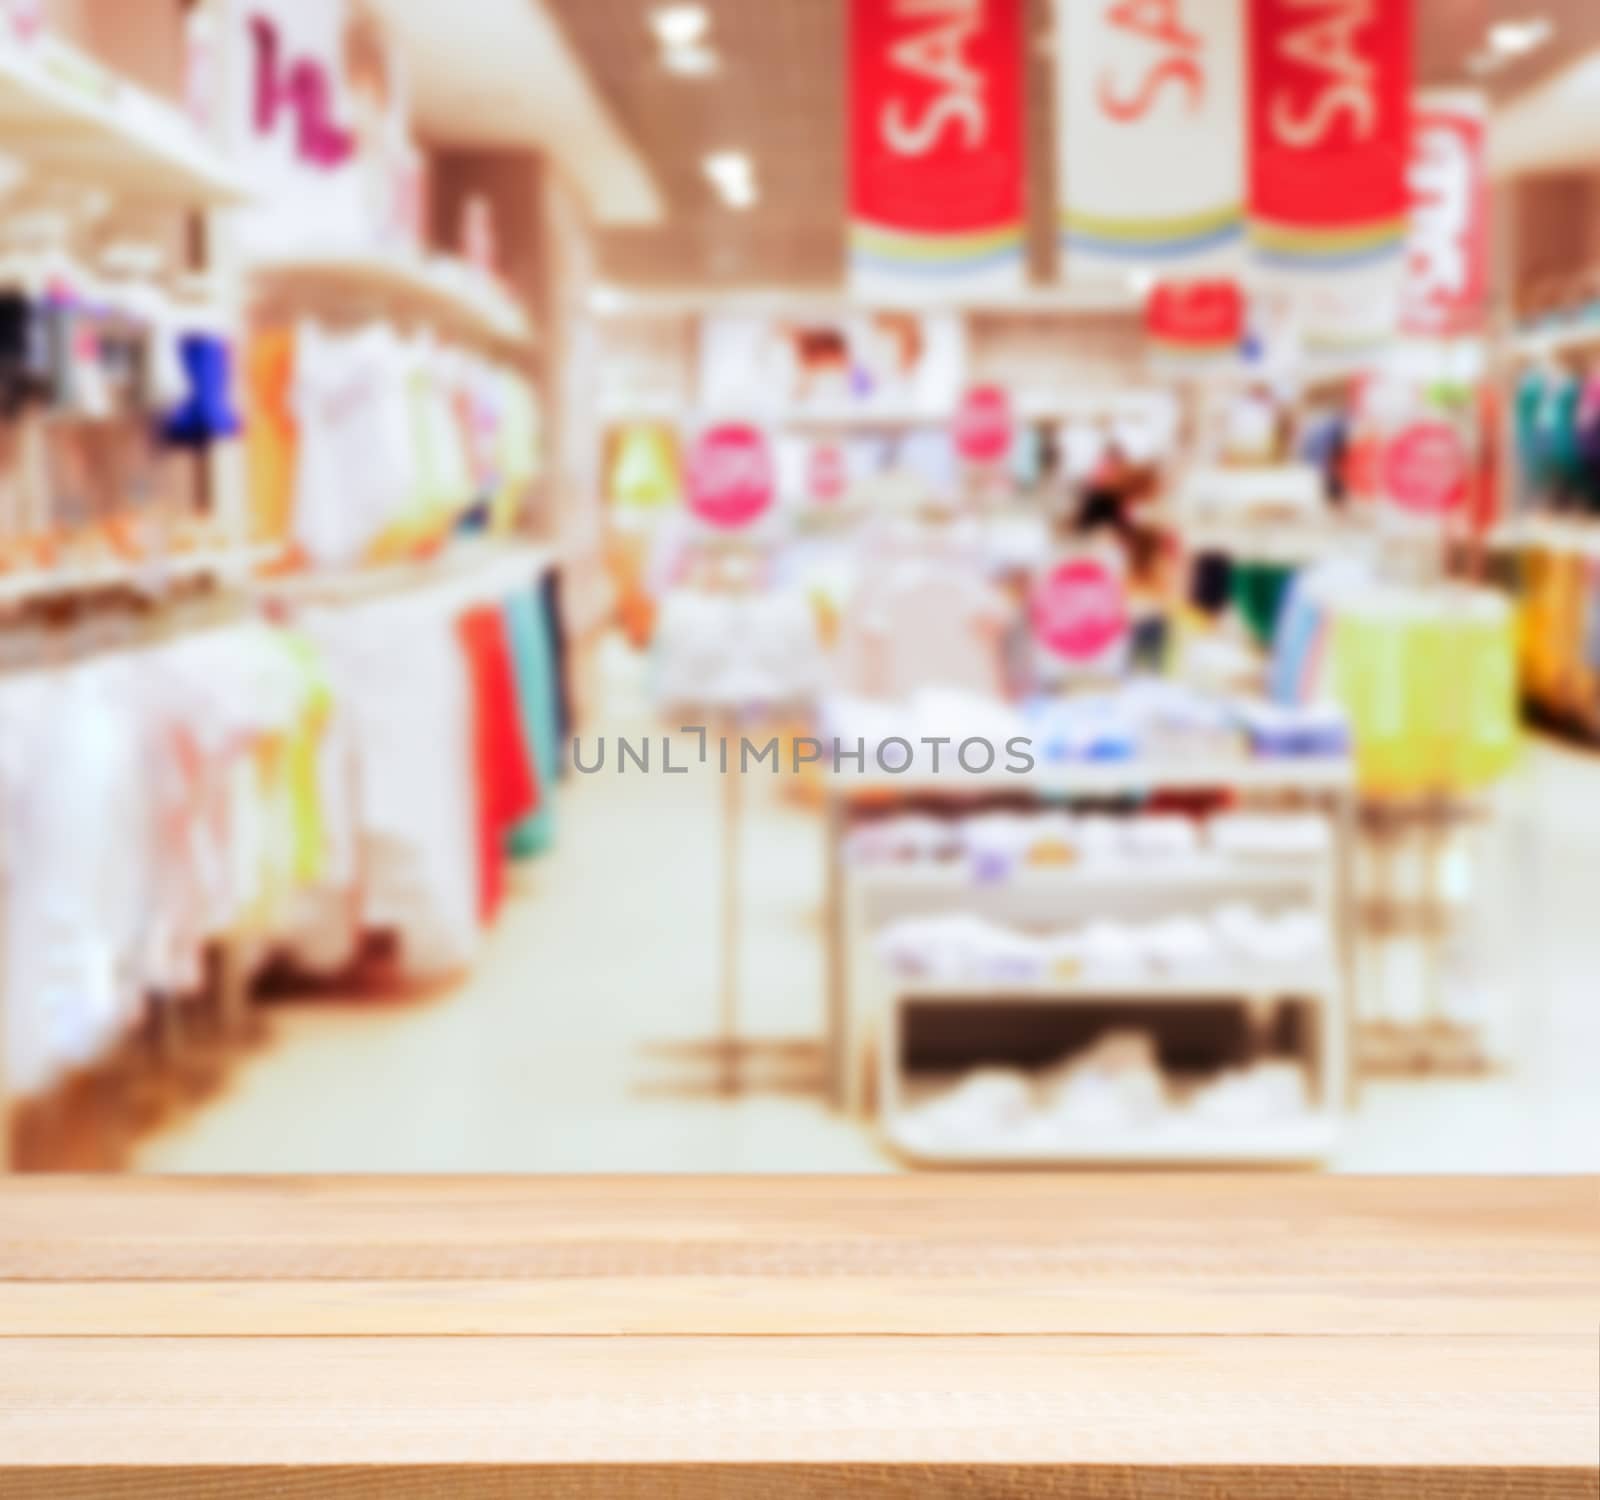 Wooden board empty table in front of blurred background. Perspective light wood table over blur in kids wear of departament store. Mock up for display or montage your product.